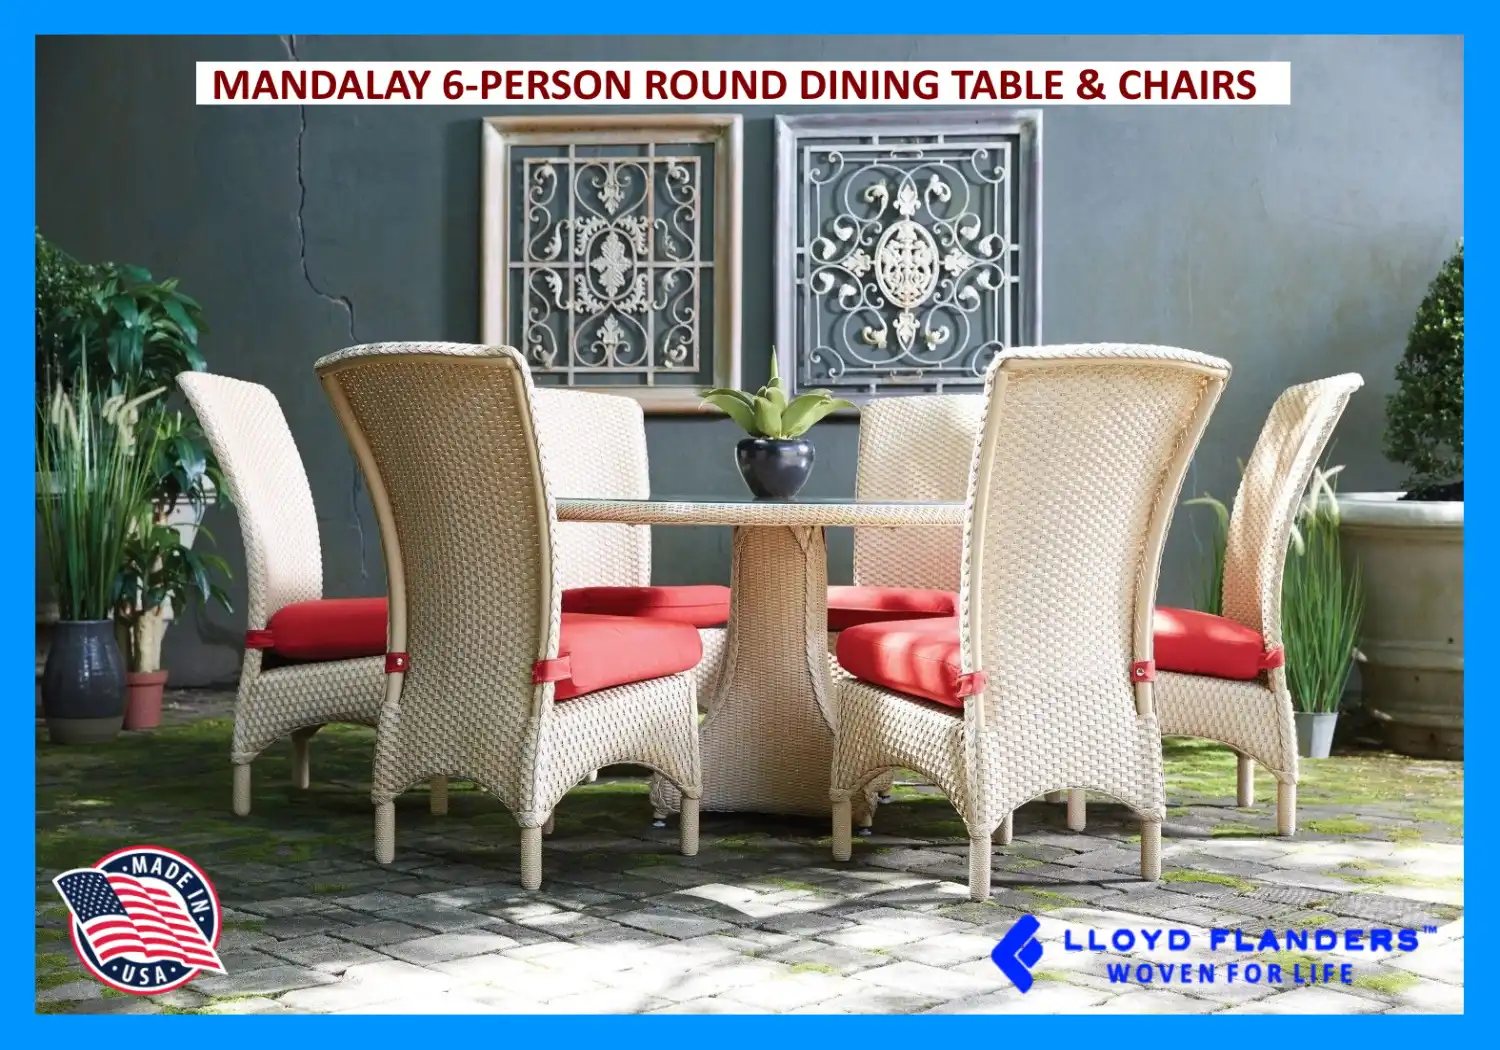 MANDALAY 6-PERSON ROUND DINING TABLE & CHAIRS